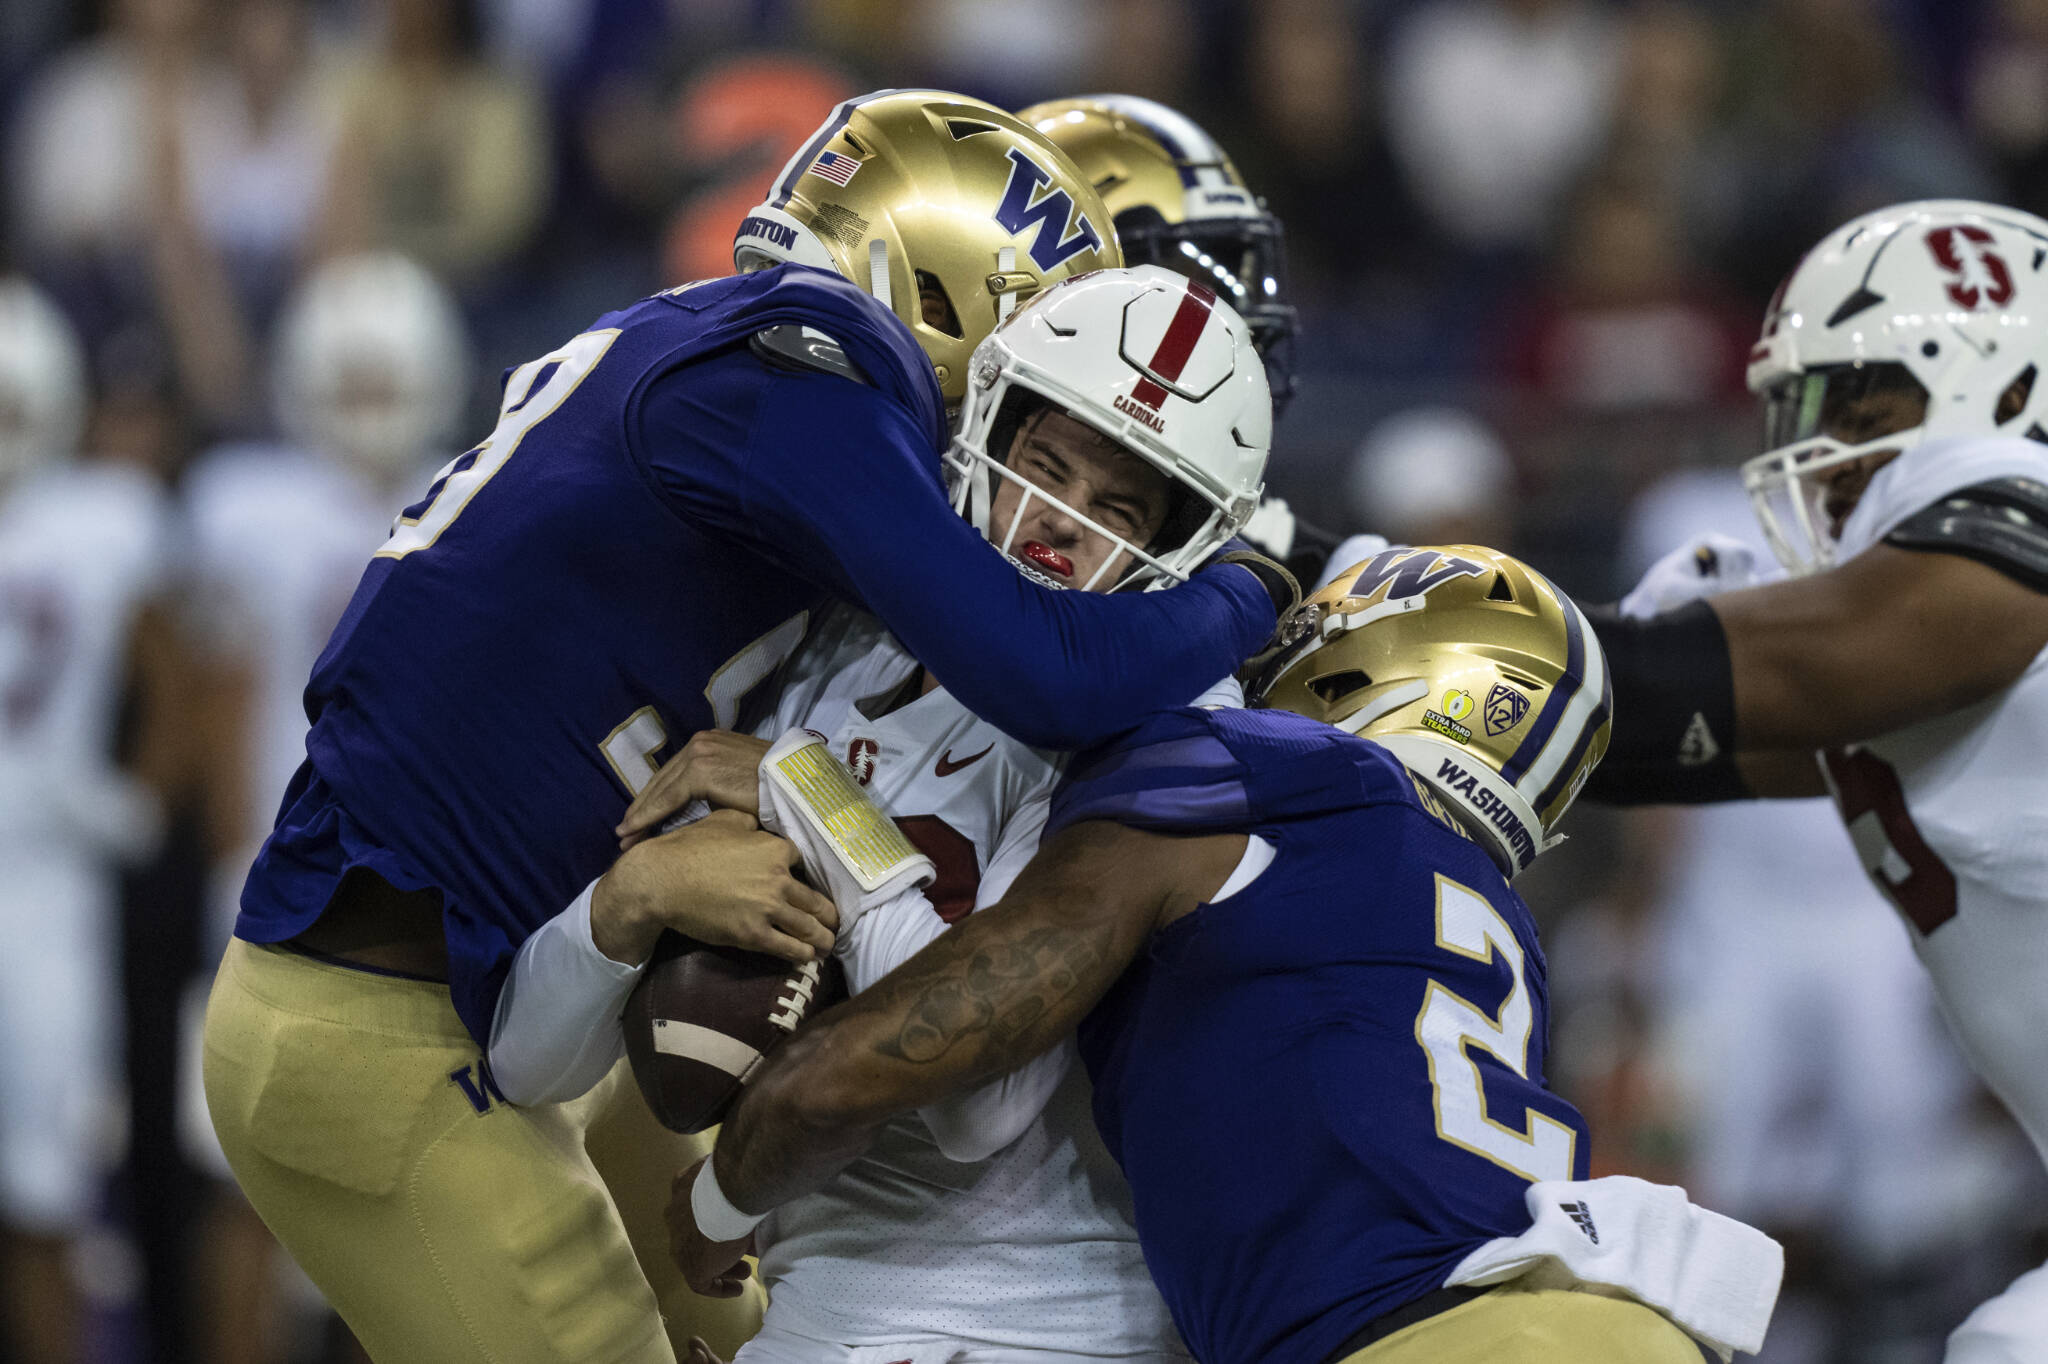 Washington’s Zion Tupuola-Fetui (left) and Cam Bright (right) sack Stanford quarterback Tanner McKee during the first half of a game Saturday night in Seattle. (AP Photo/Stephen Brashear)